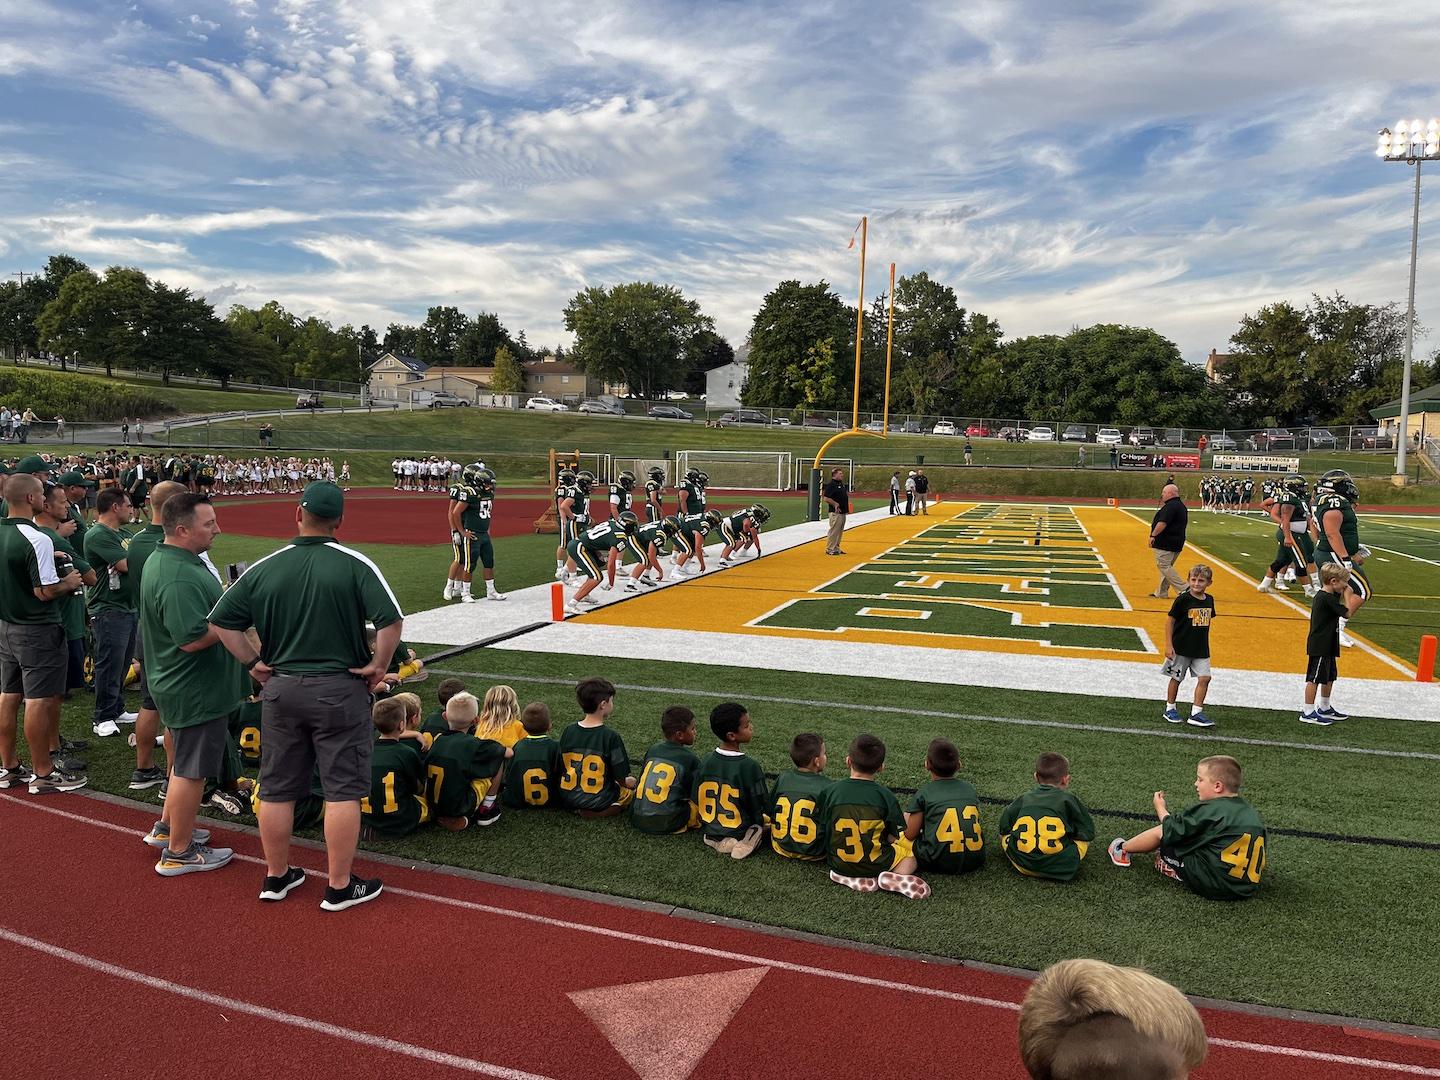 The midget football teams were able to observe warm-ups from a great vantage point